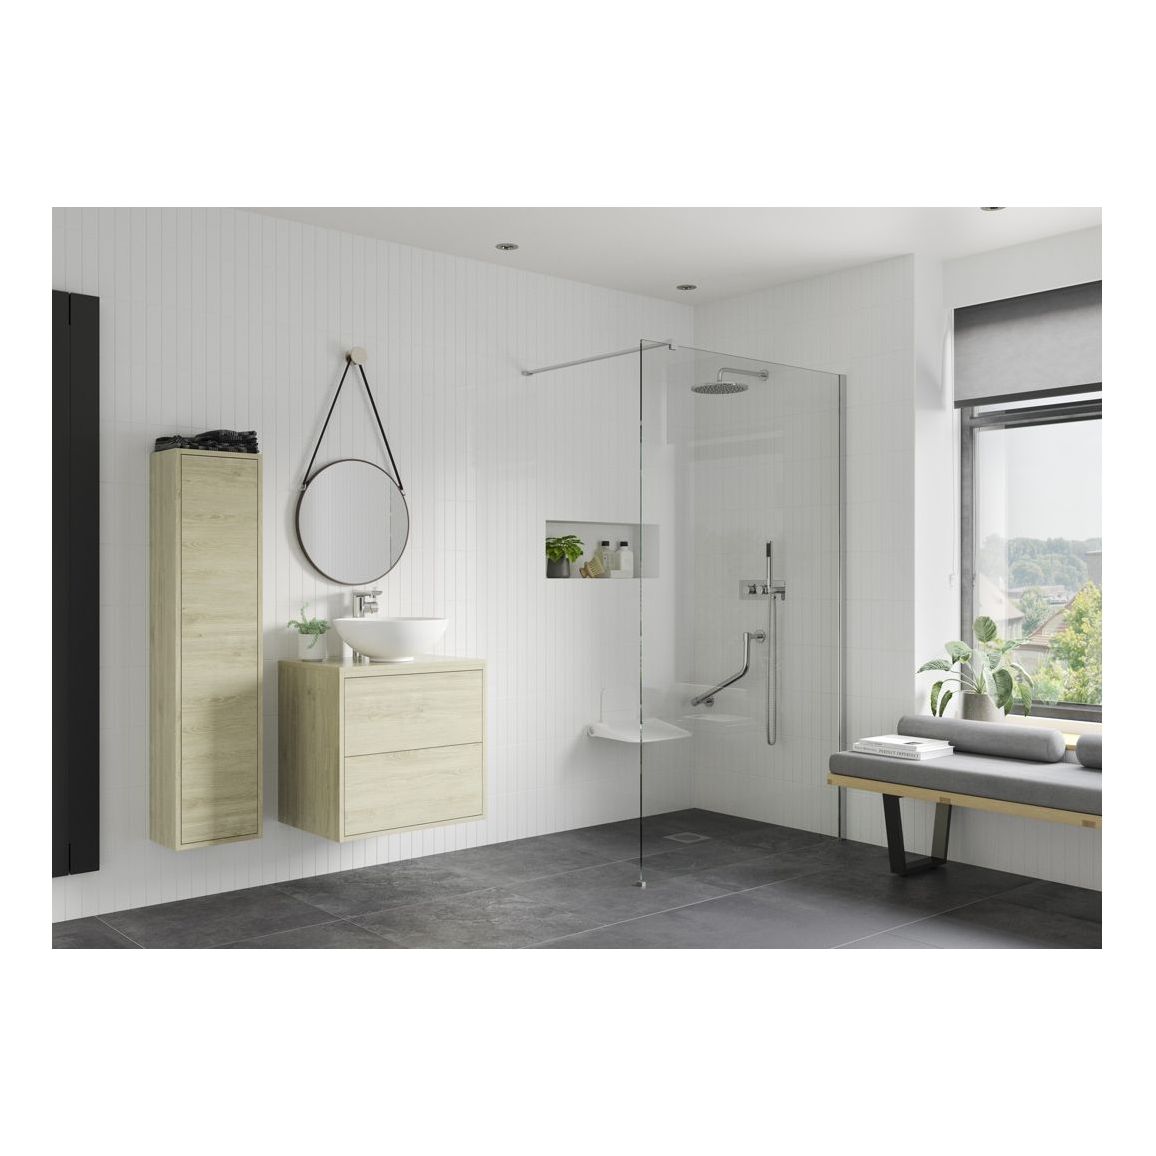 Montague 700mm Wetroom Panel & Floor-to-Ceiling Pole - Chrome